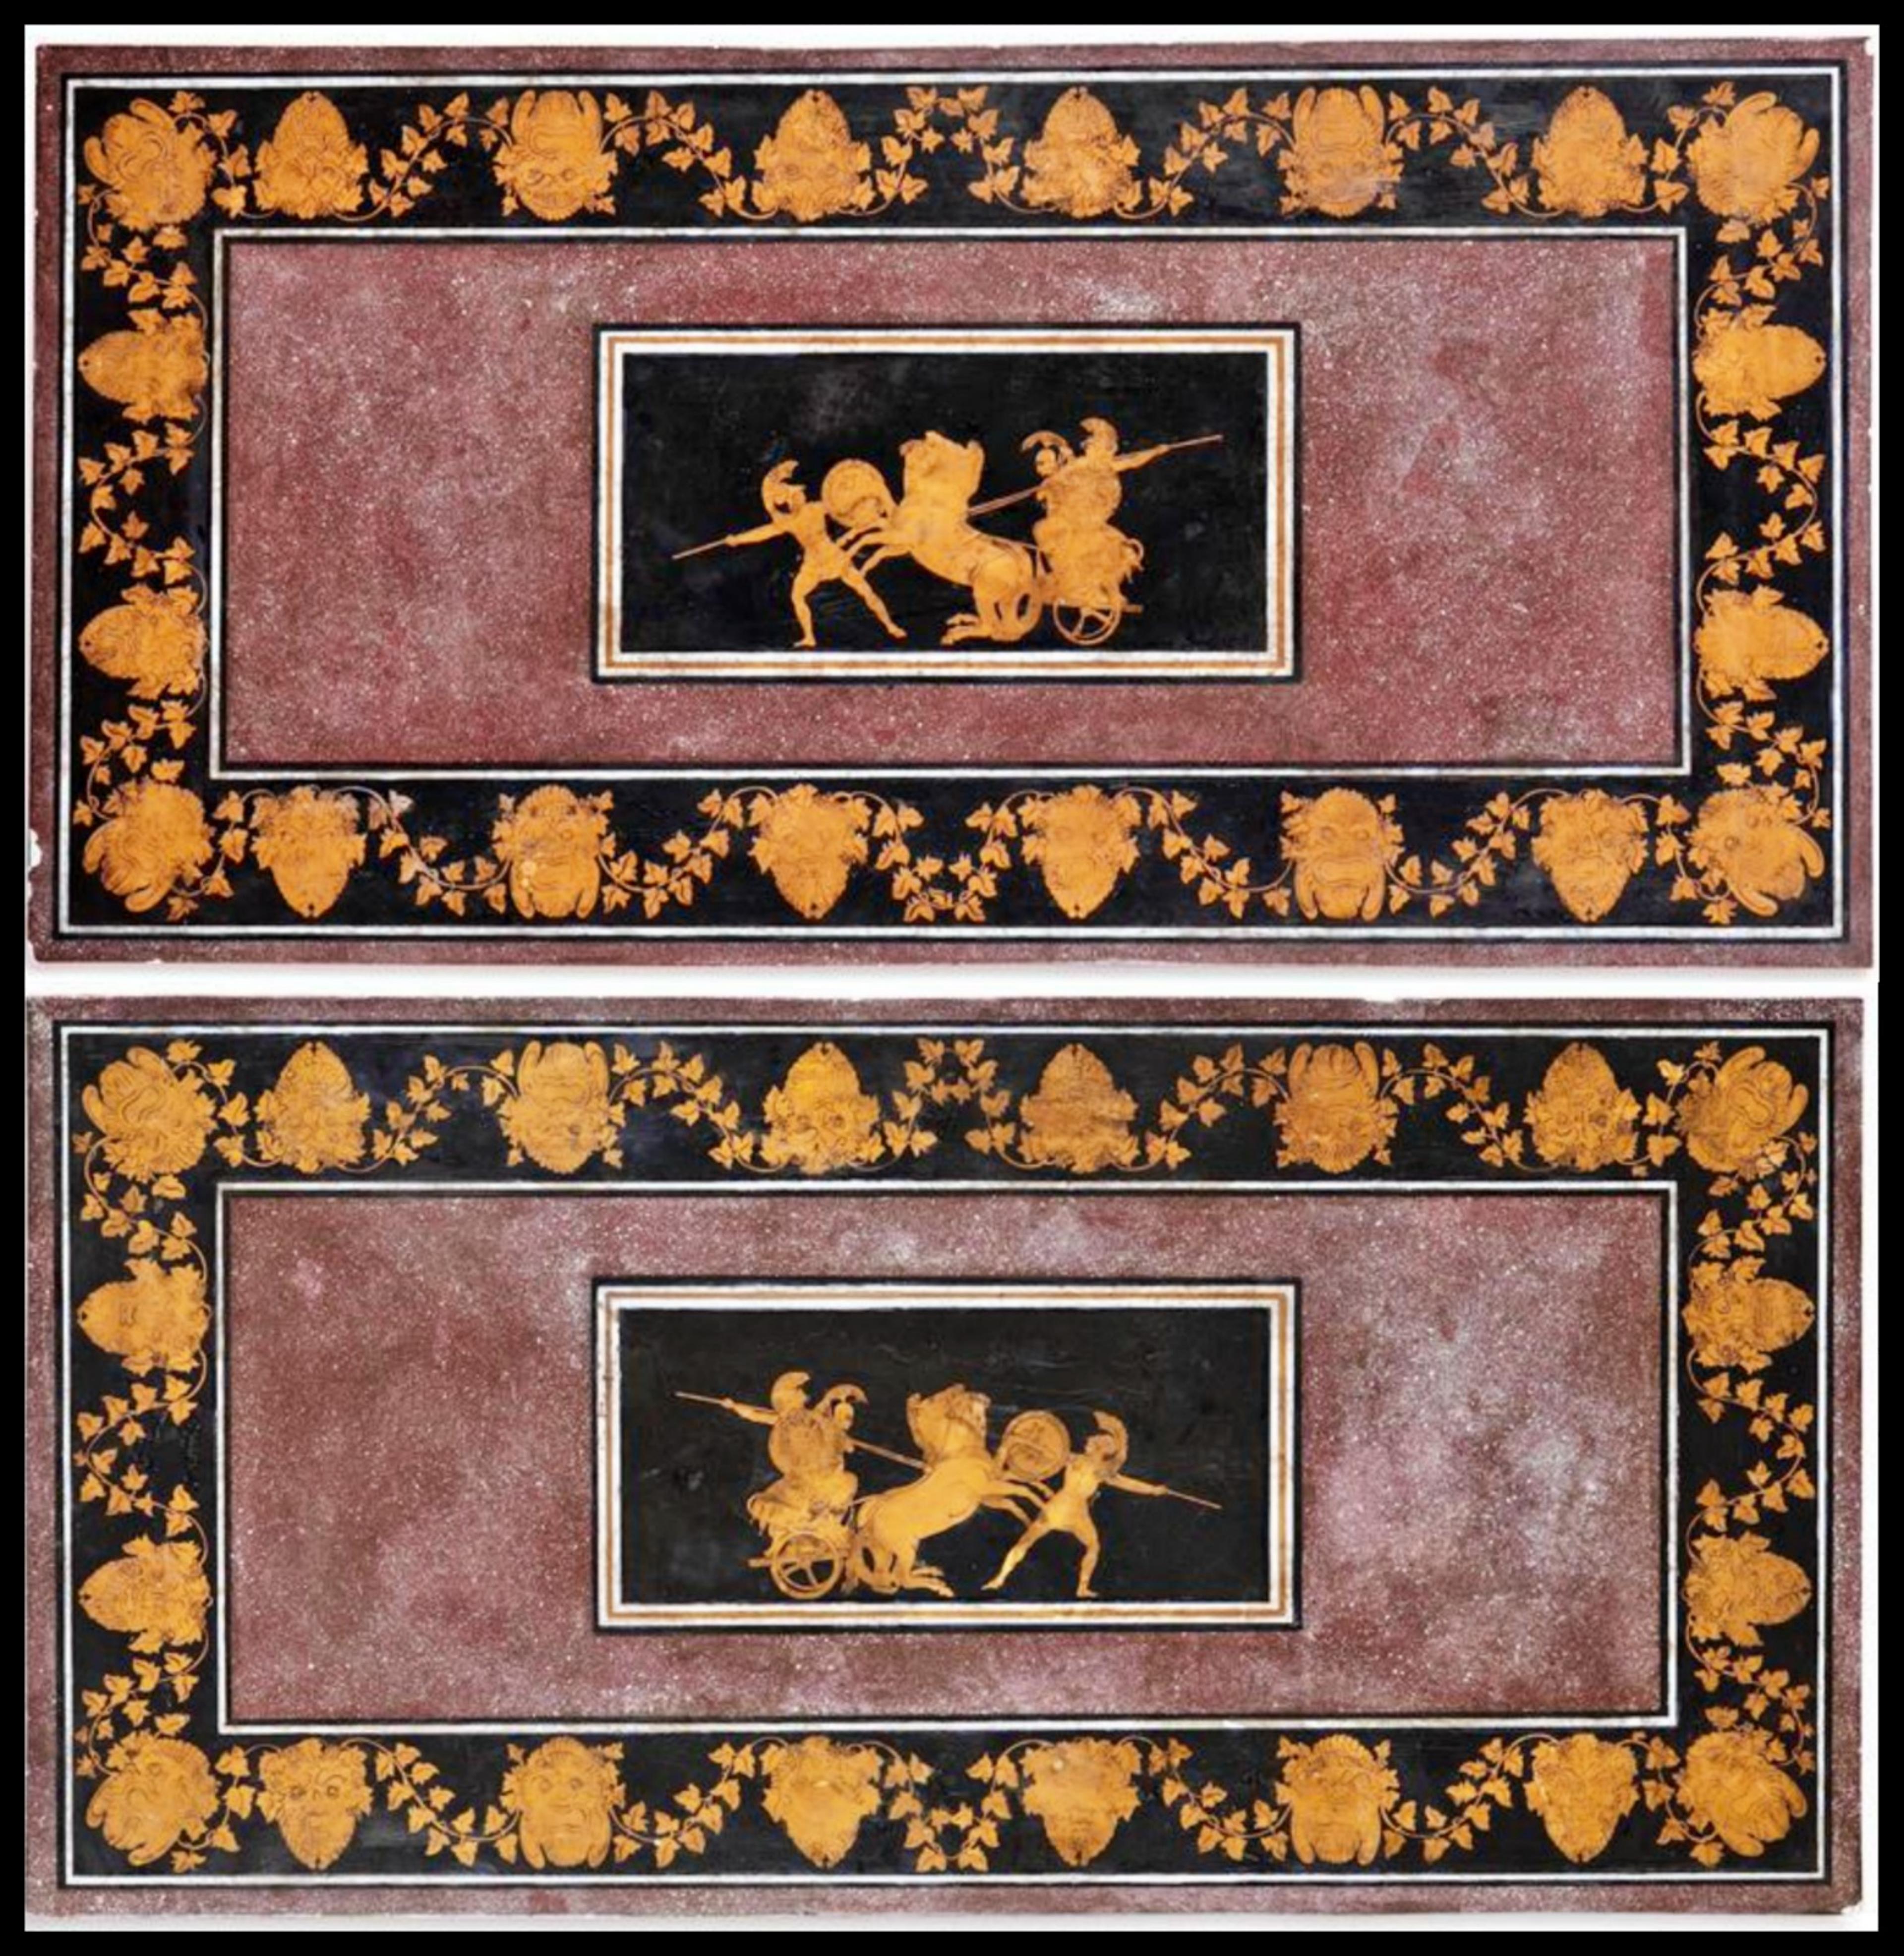 Pair of Scagliola Tops, Italian manufacture, Naples, 18th century
rectangular in shape

130X65X4.5cm
Reserves in yellow and black on a porphyry background
good conditions